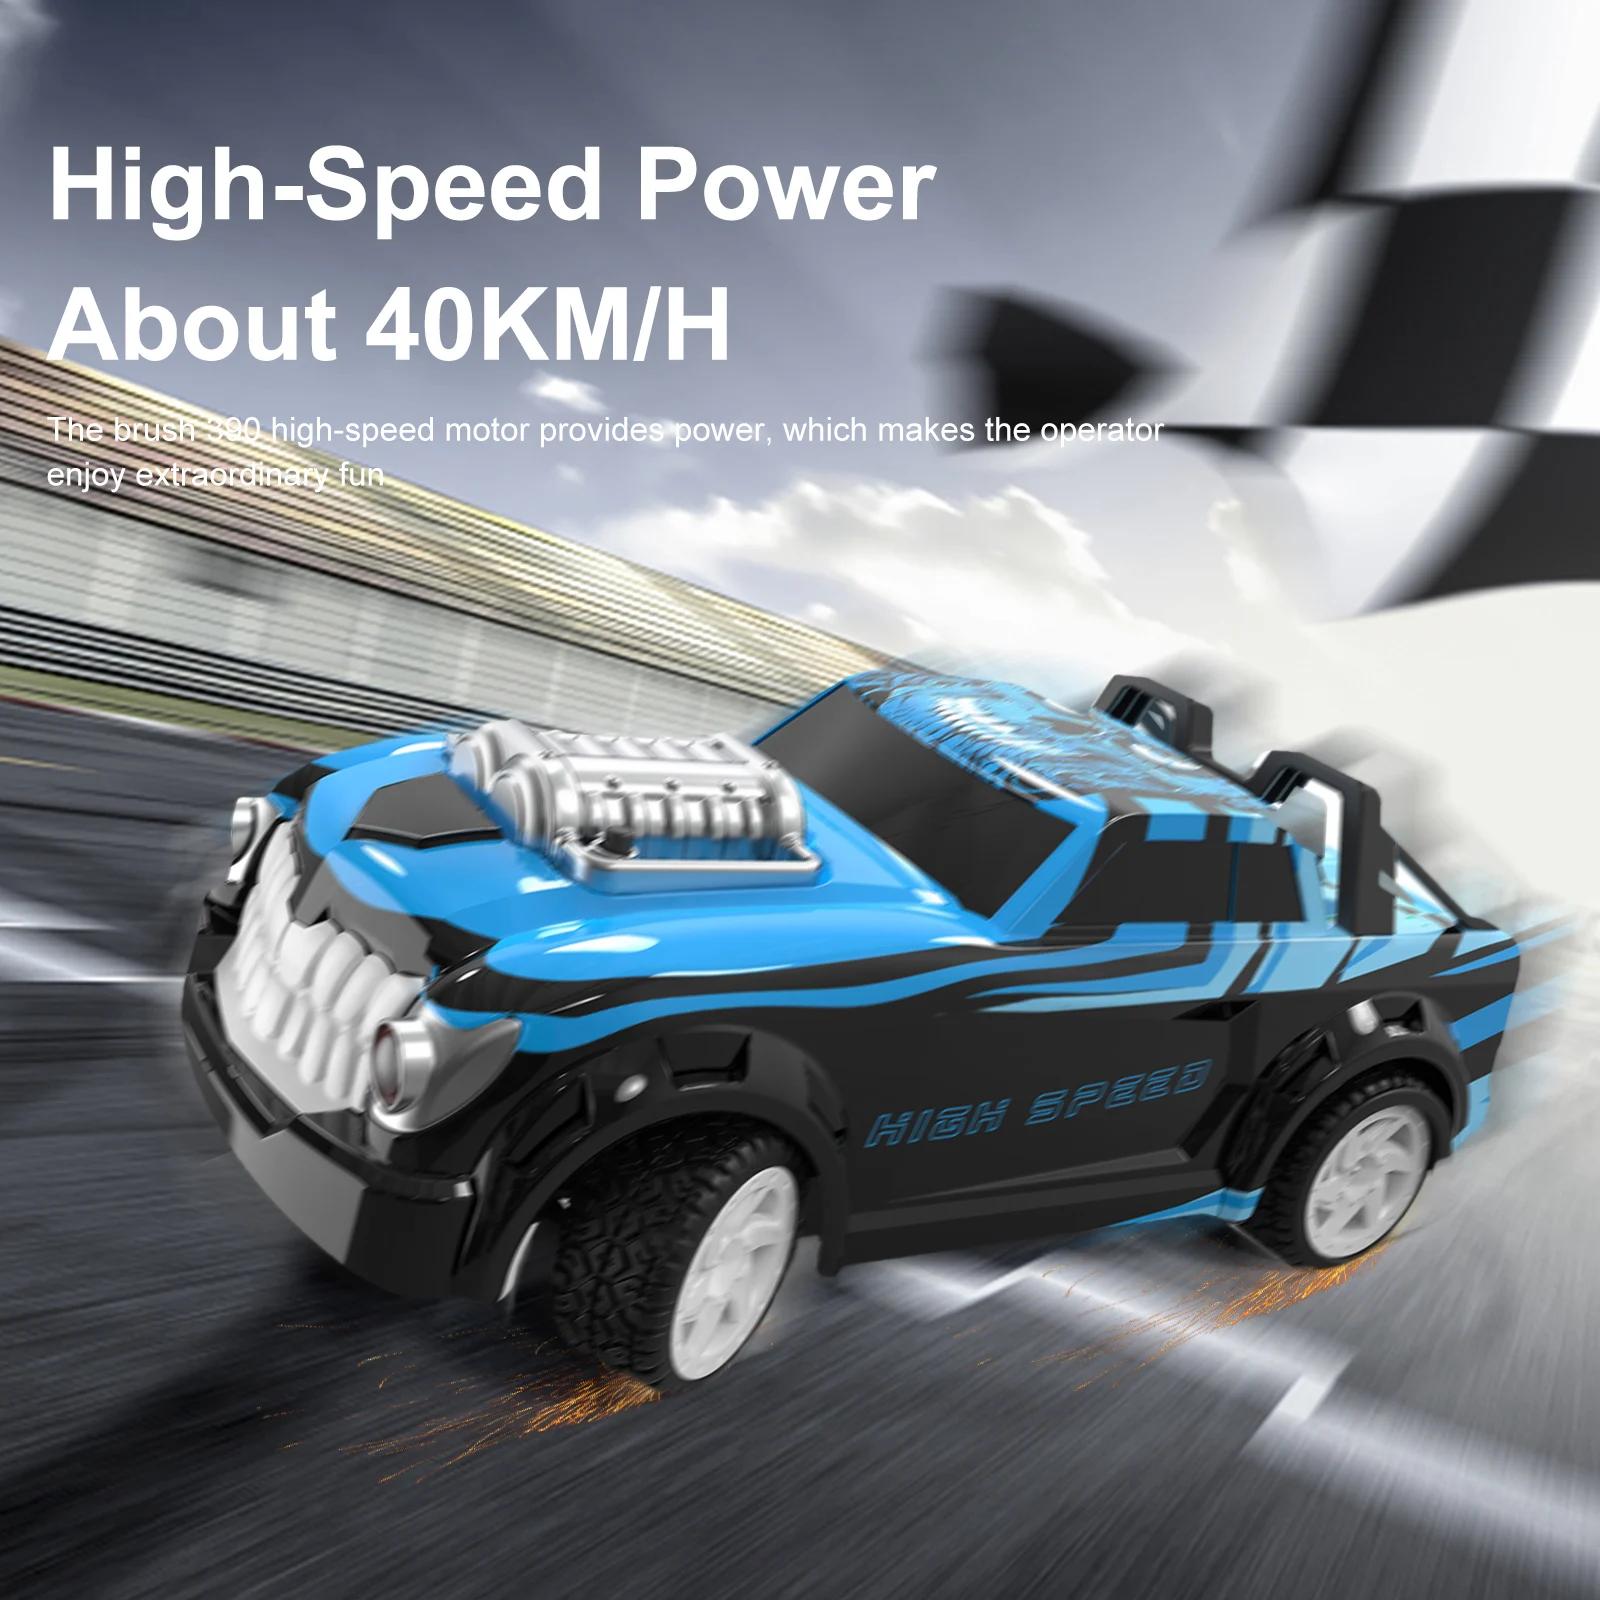 Rc Racing Car Drifting Cars Model 1:14 4WD Remote Control 40Km/h High Speed Car Kids Children Toys for Boys kid Christmas Gifts enlarge